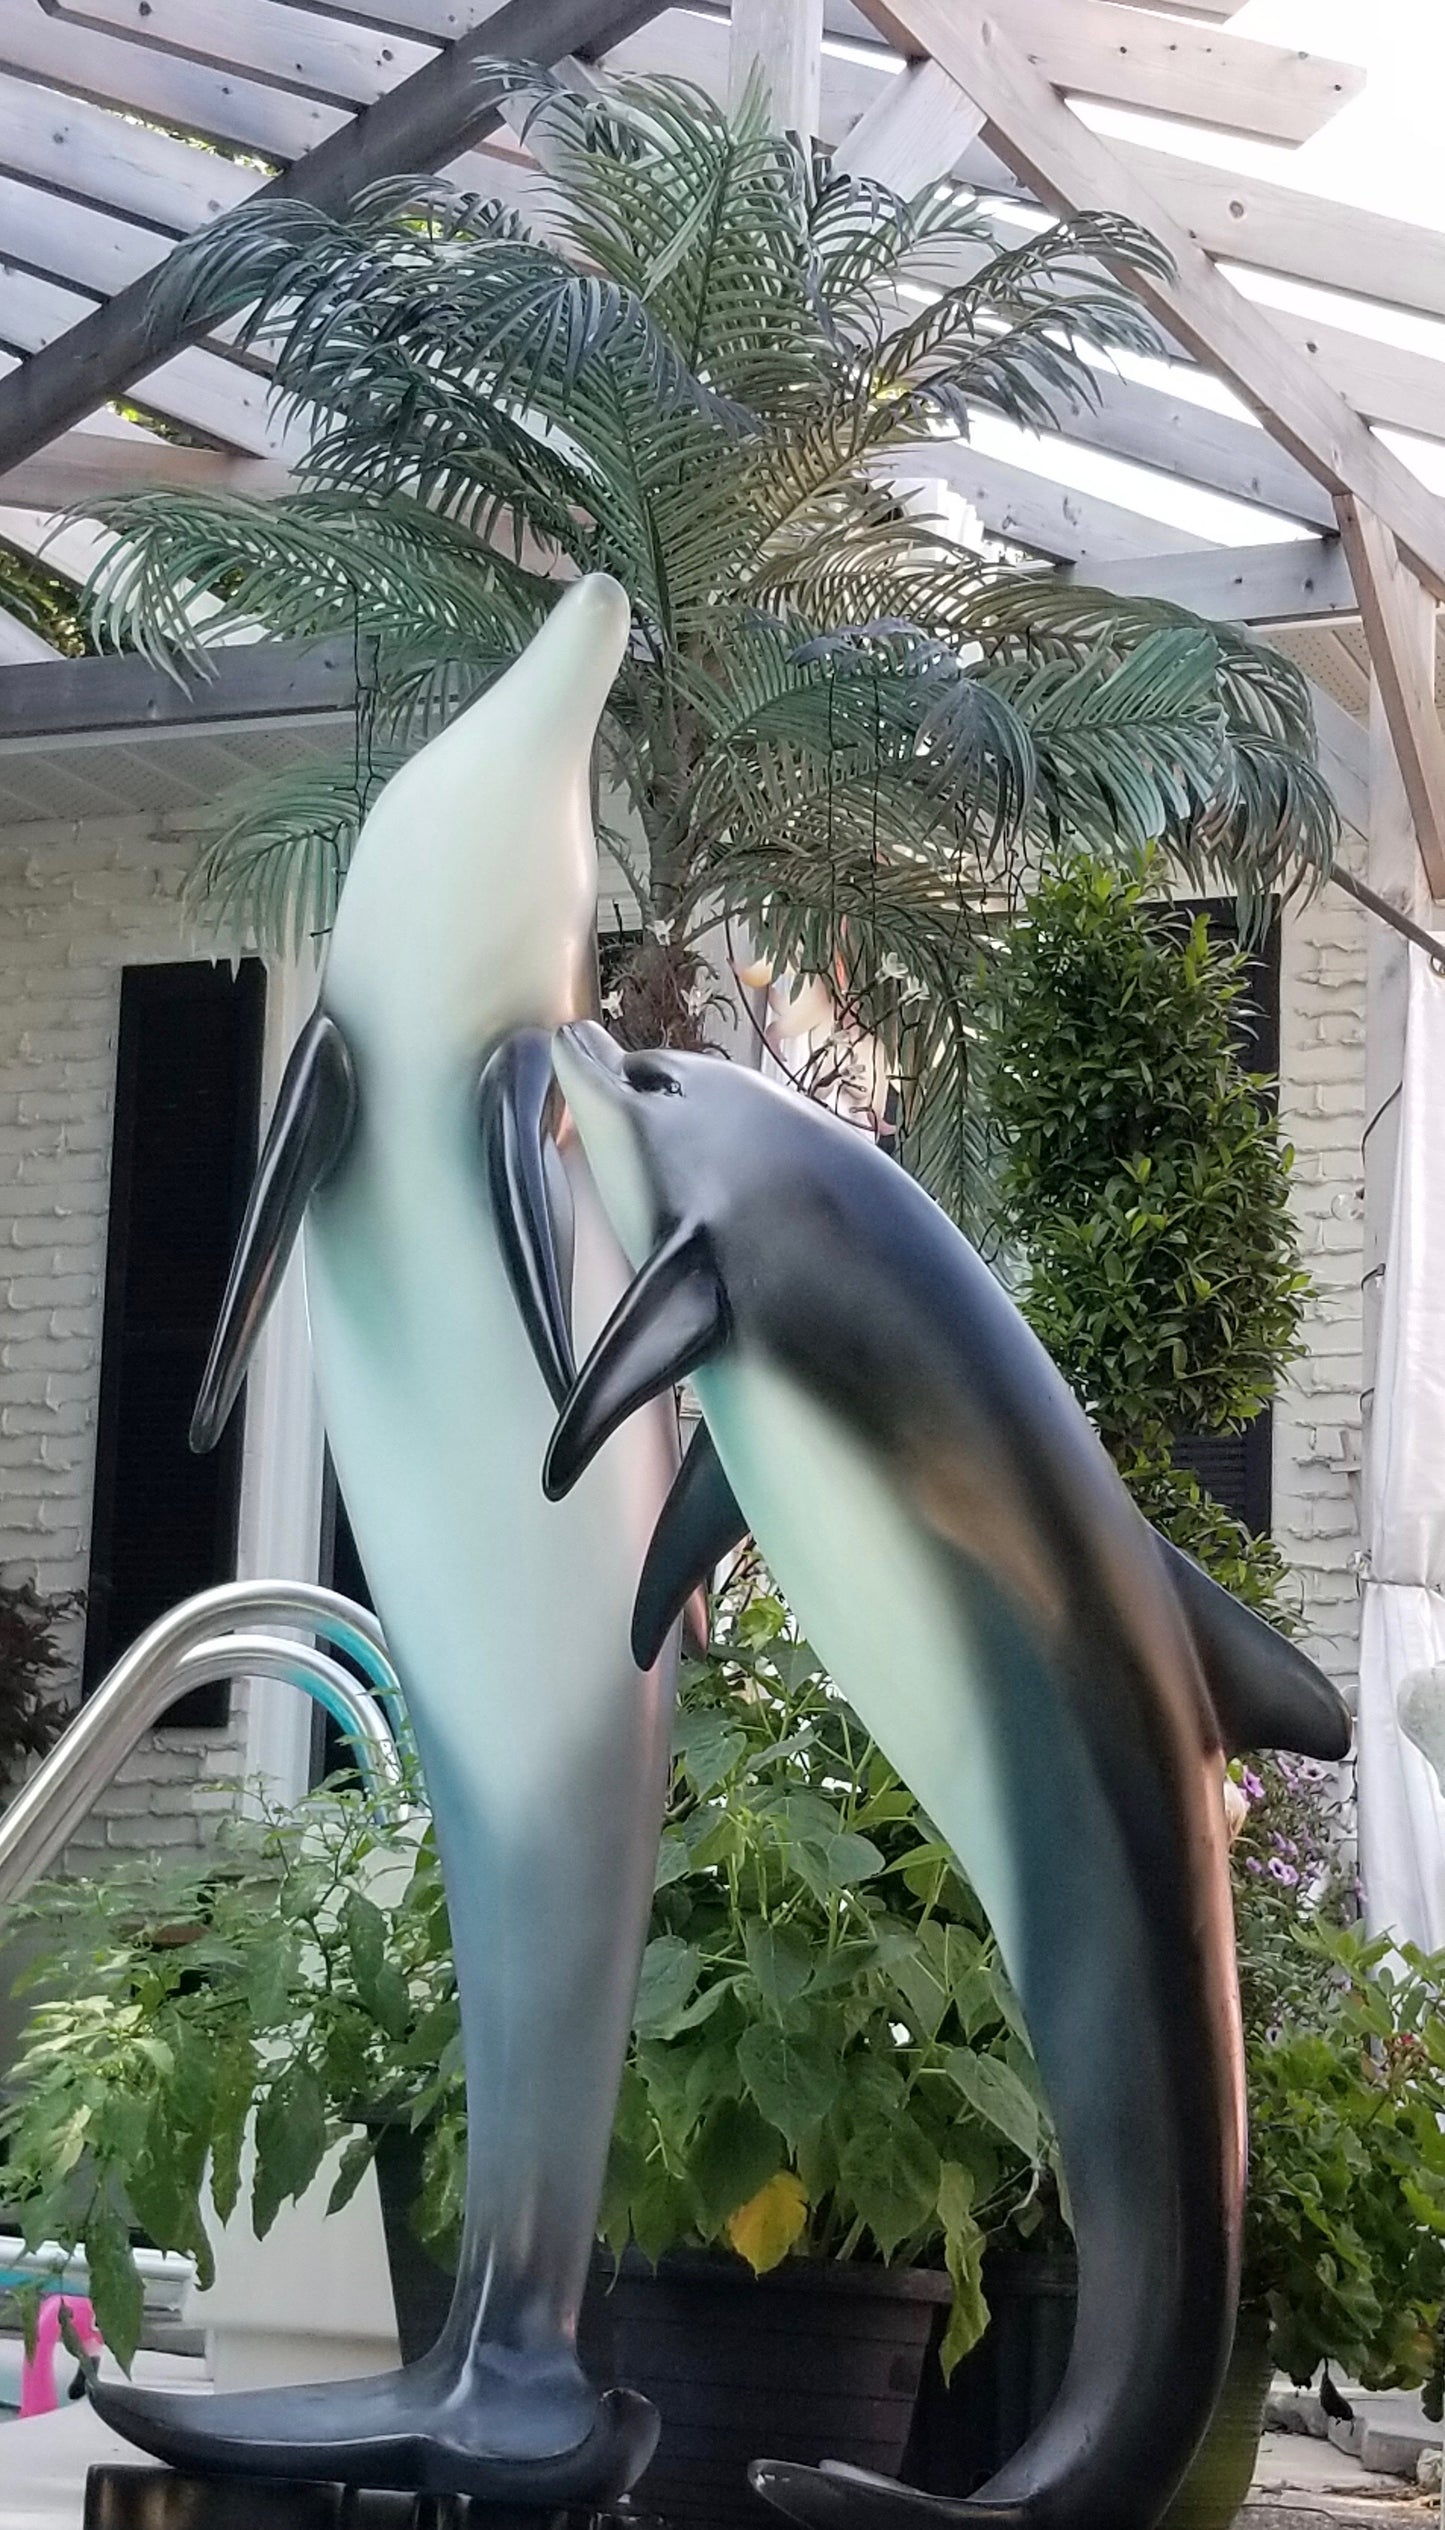 dolphin statue pair tropical pose